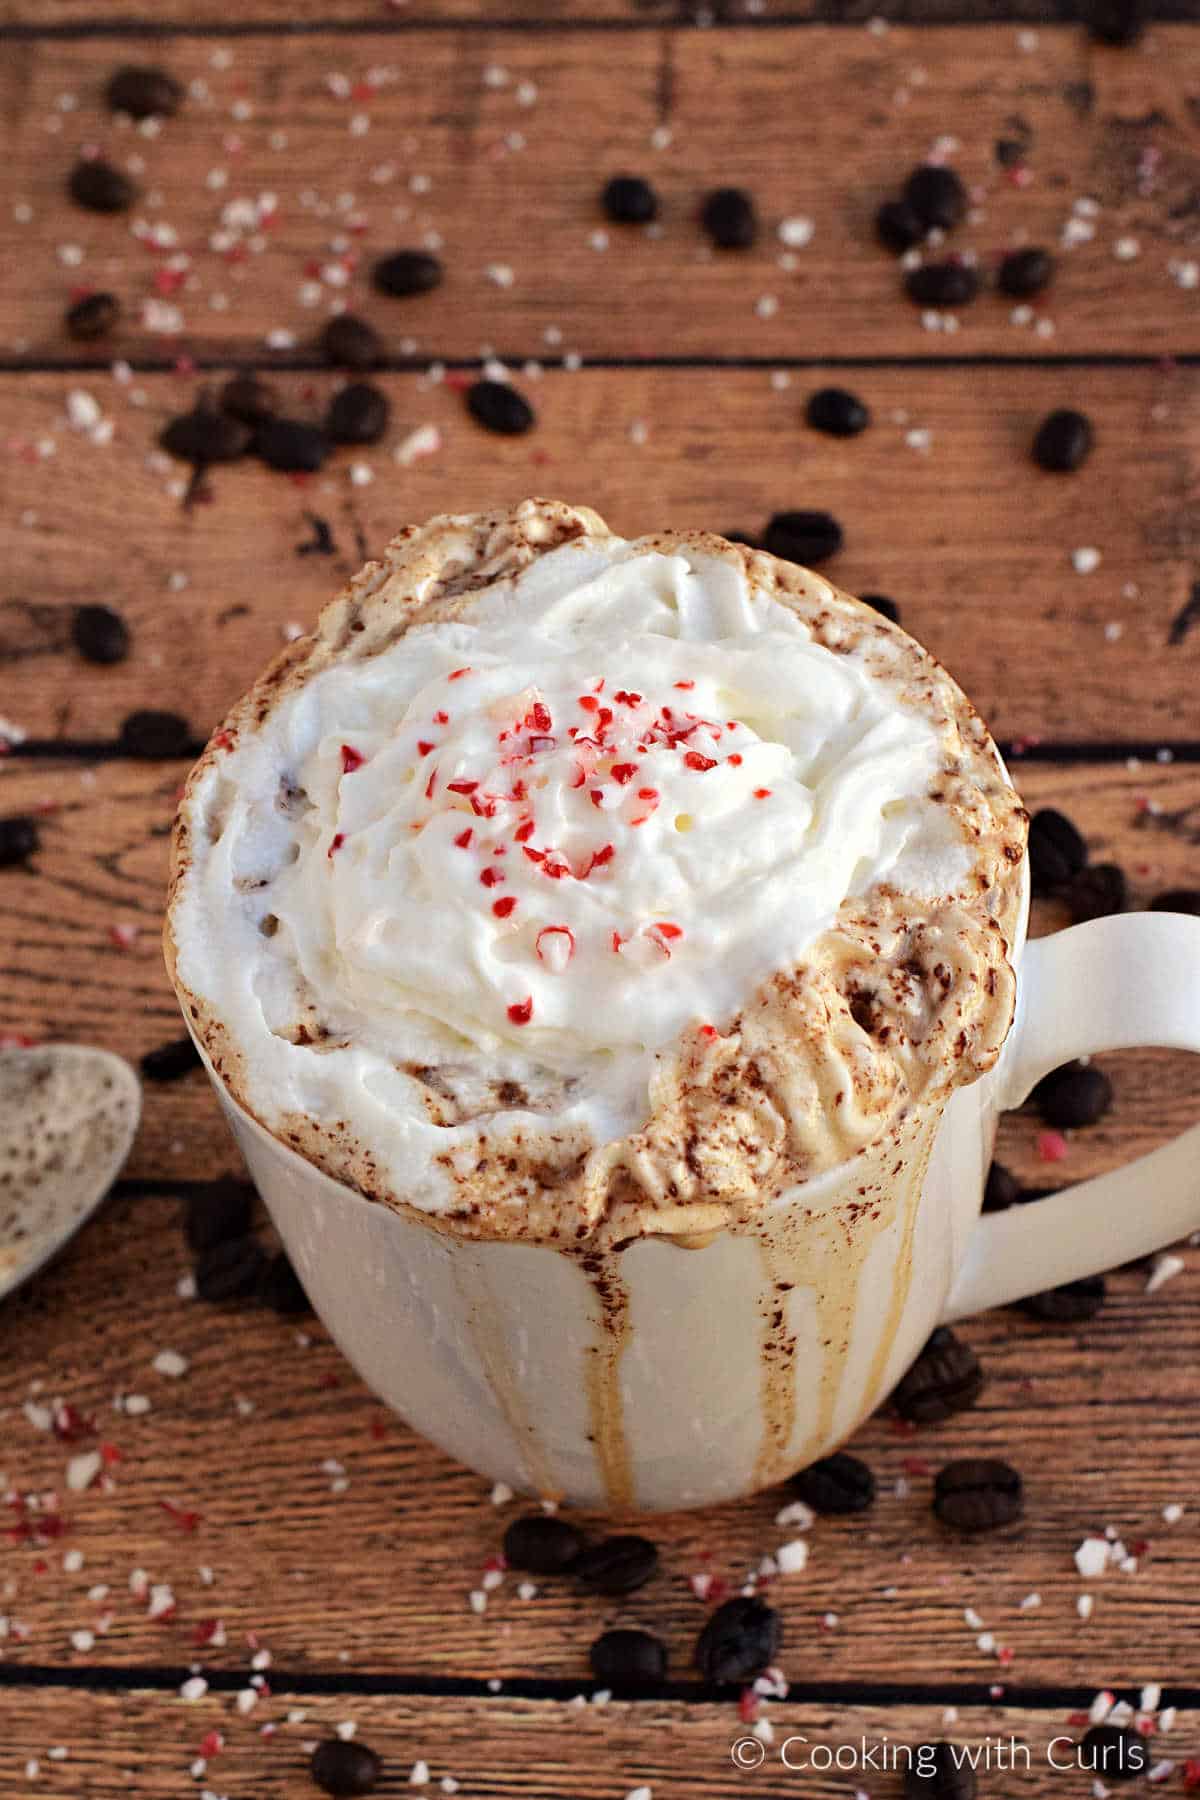 Caffe Mocha topped with whipped cream and crushed peppermint candies.